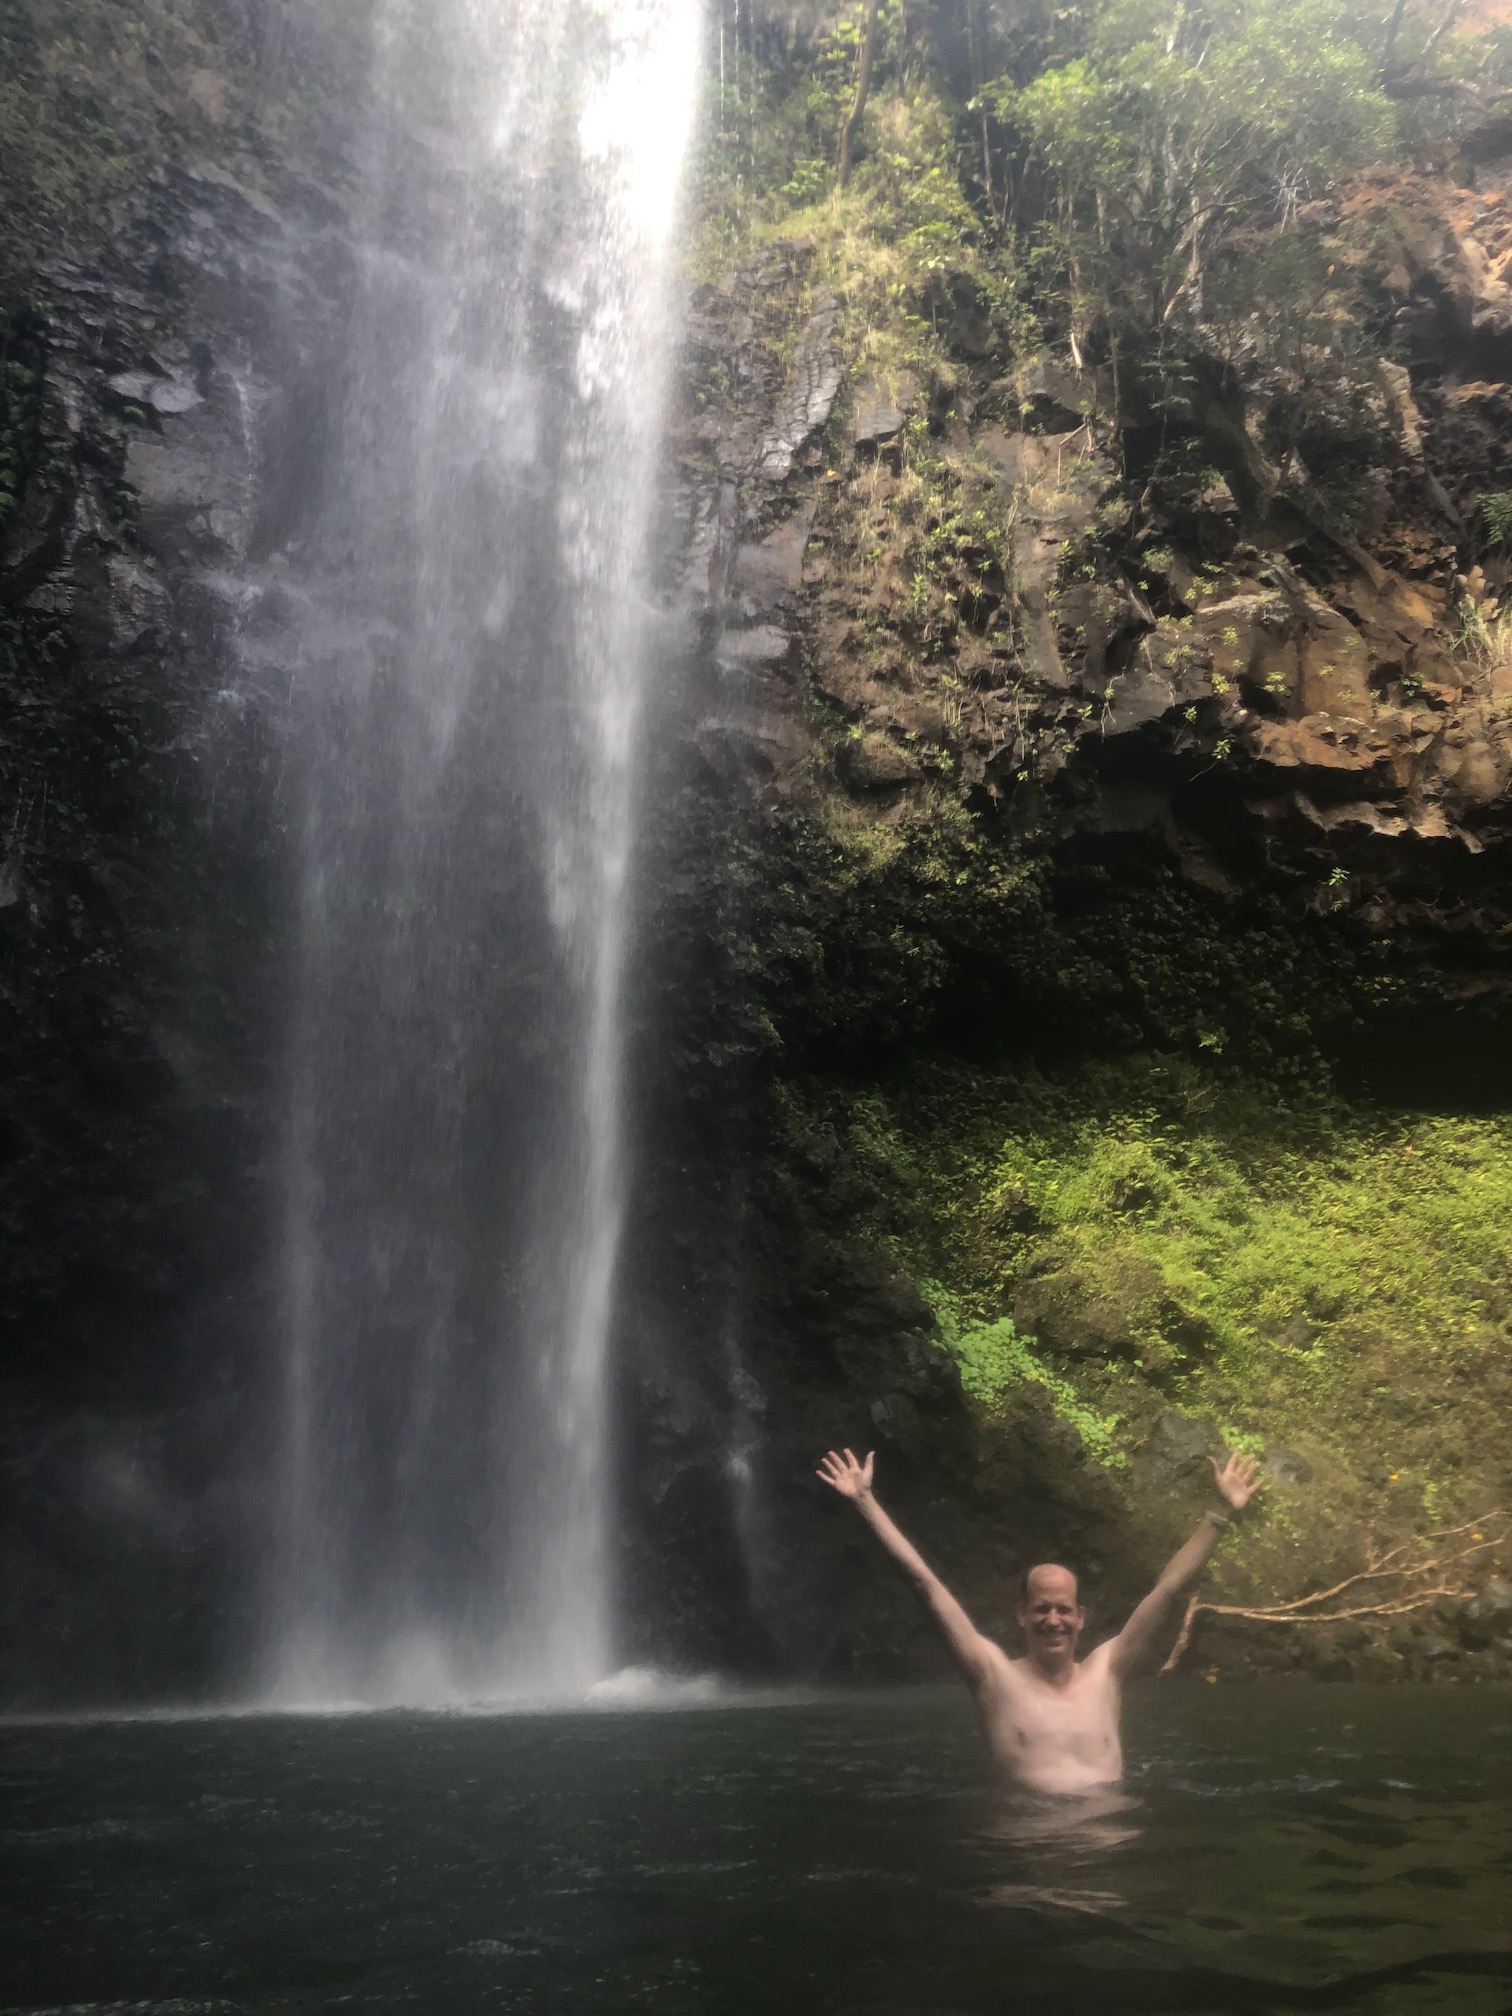 hunter with arms raised in the falls